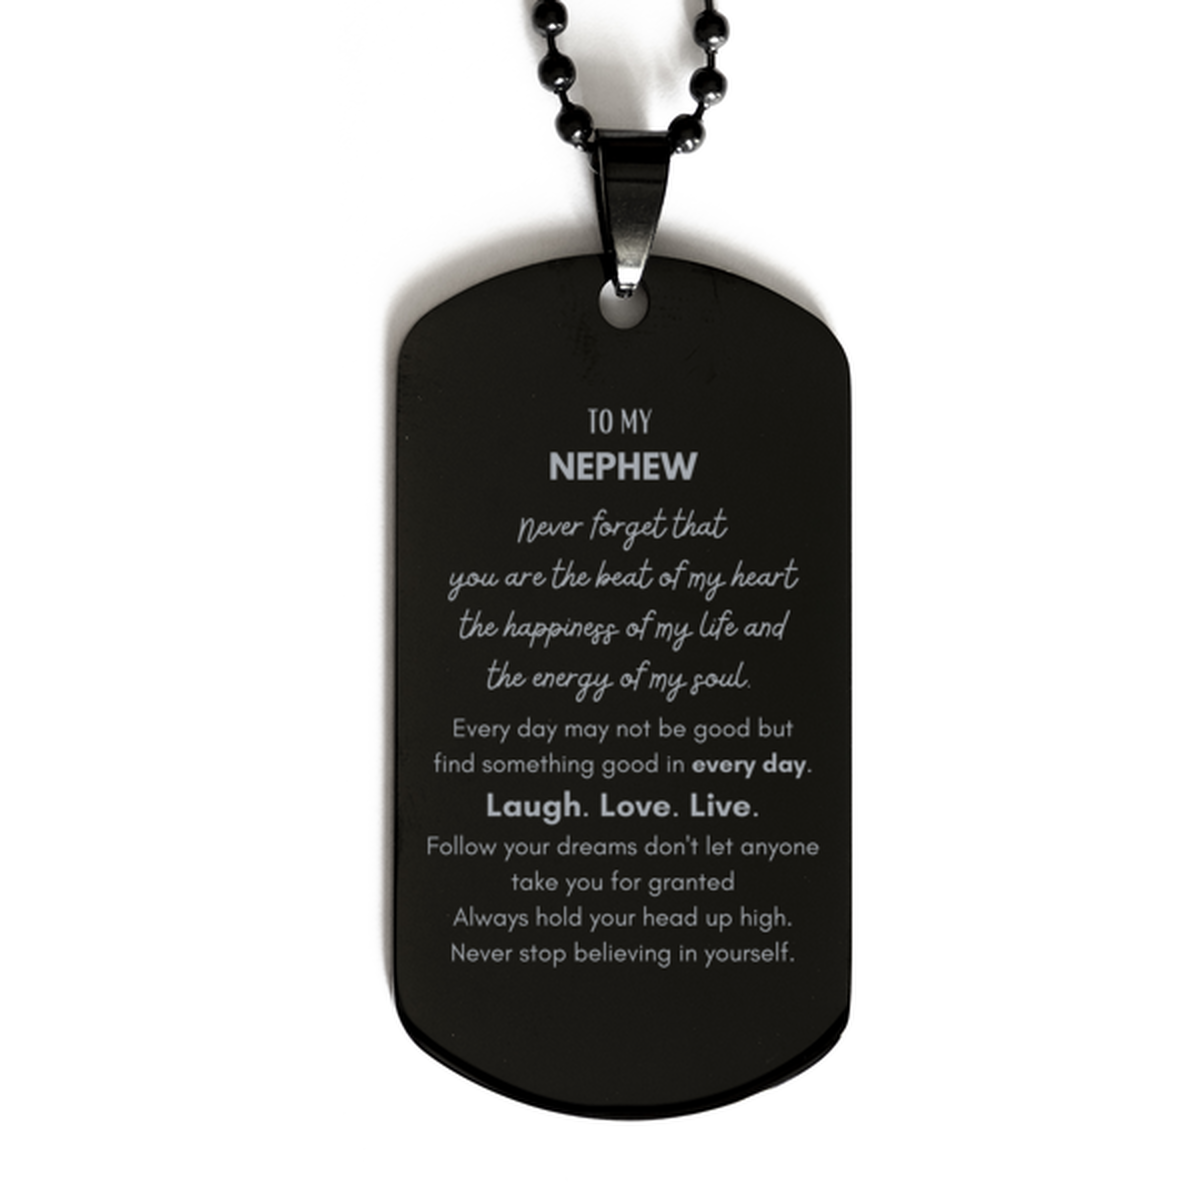 To My Nephew Dogtag Gifts, Christmas Nephew Black Dog Tag Present, Birthday Unique Motivational For Nephew, To My Nephew Never forget that you are the beat of my heart the happiness of my life and the energy of my soul